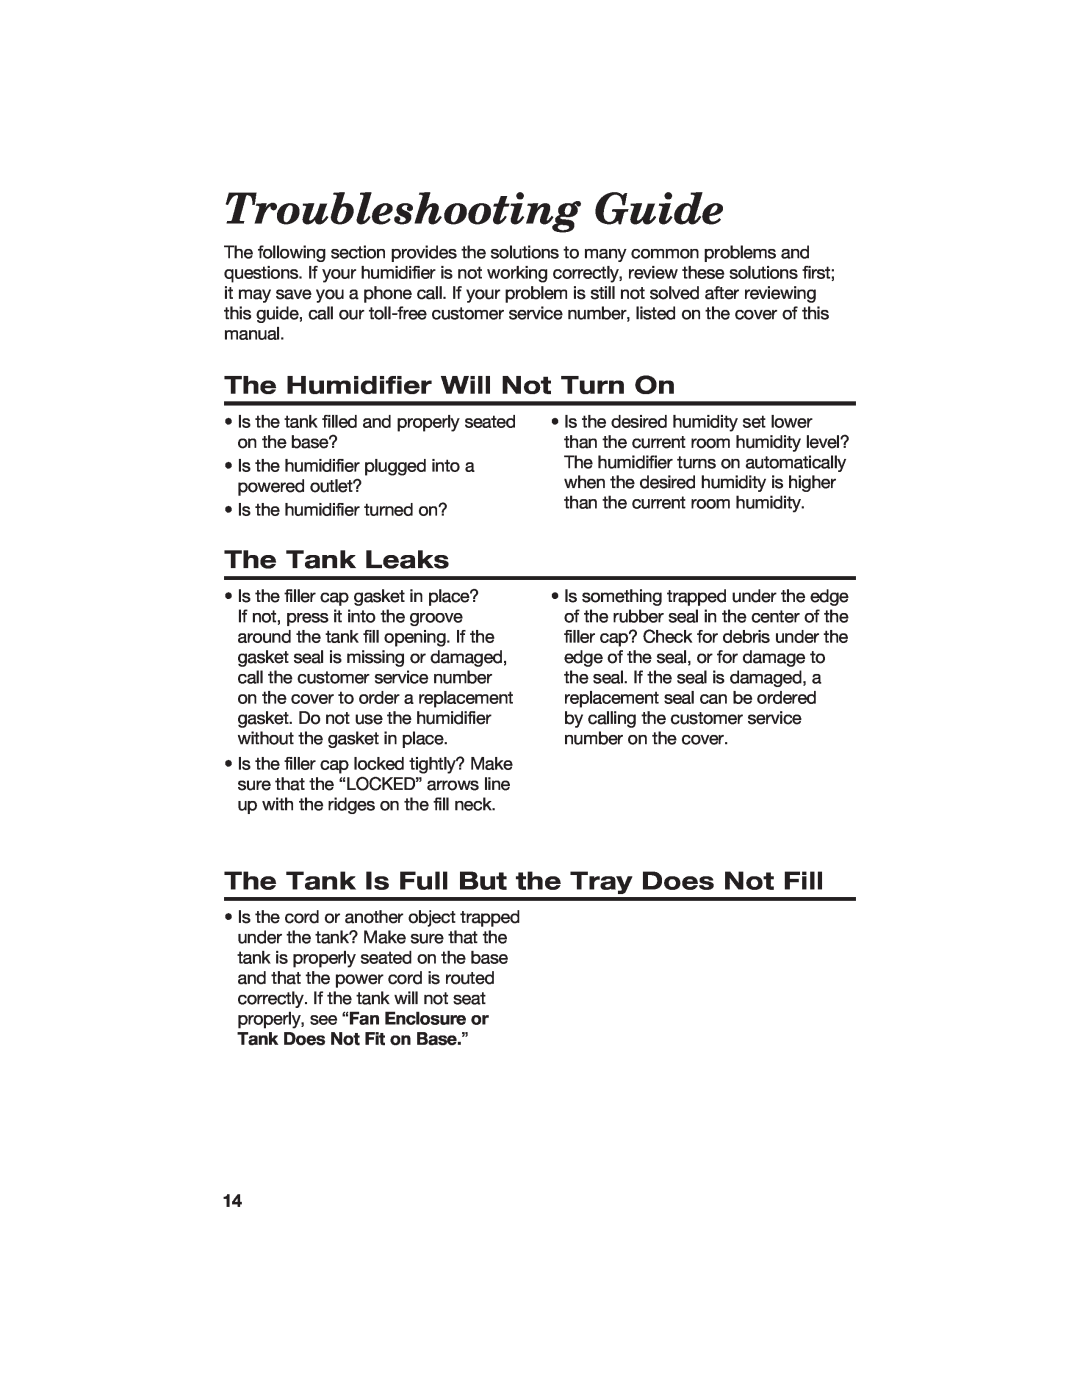 Hamilton Beach 840074800 manual Troubleshooting Guide, The Humidifier Will Not Turn On, The Tank Leaks 